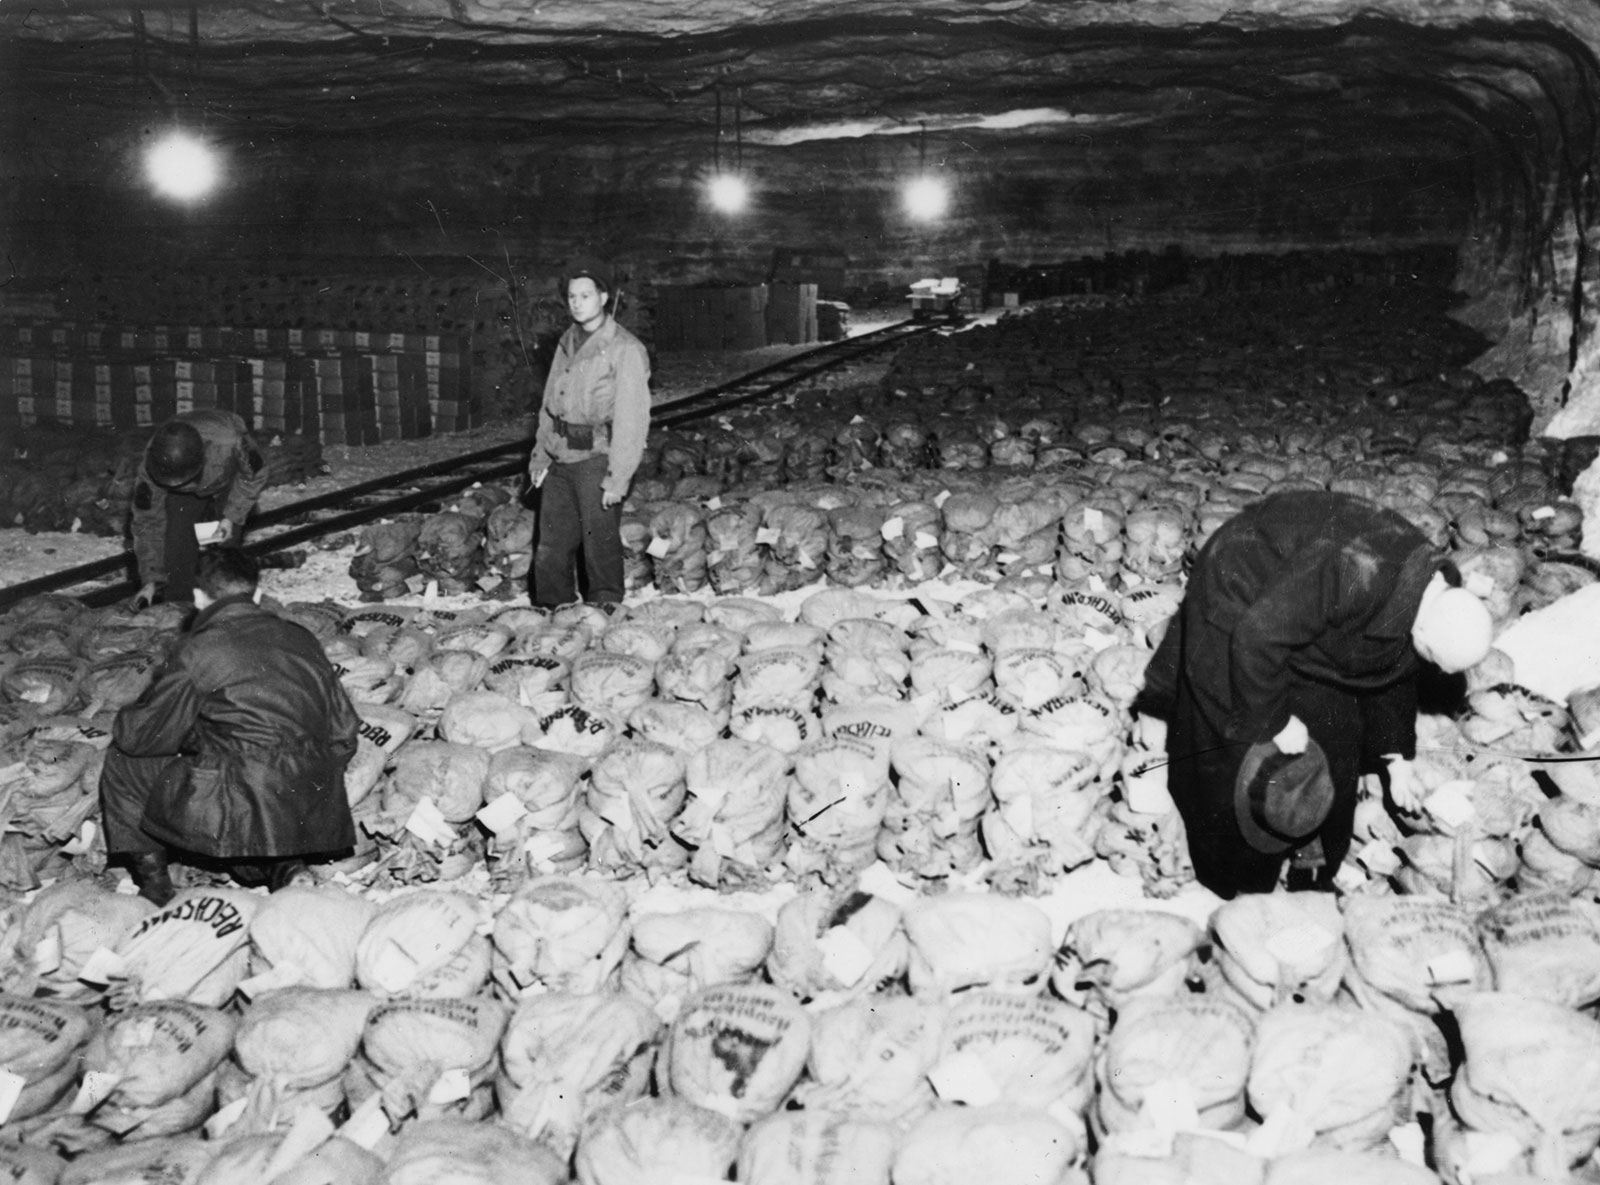 Members of General Patton's army with a stash of approximately 100 tons of gold bullion and art treasures found hidden in a salt mine near Merkers, Germany, 1945